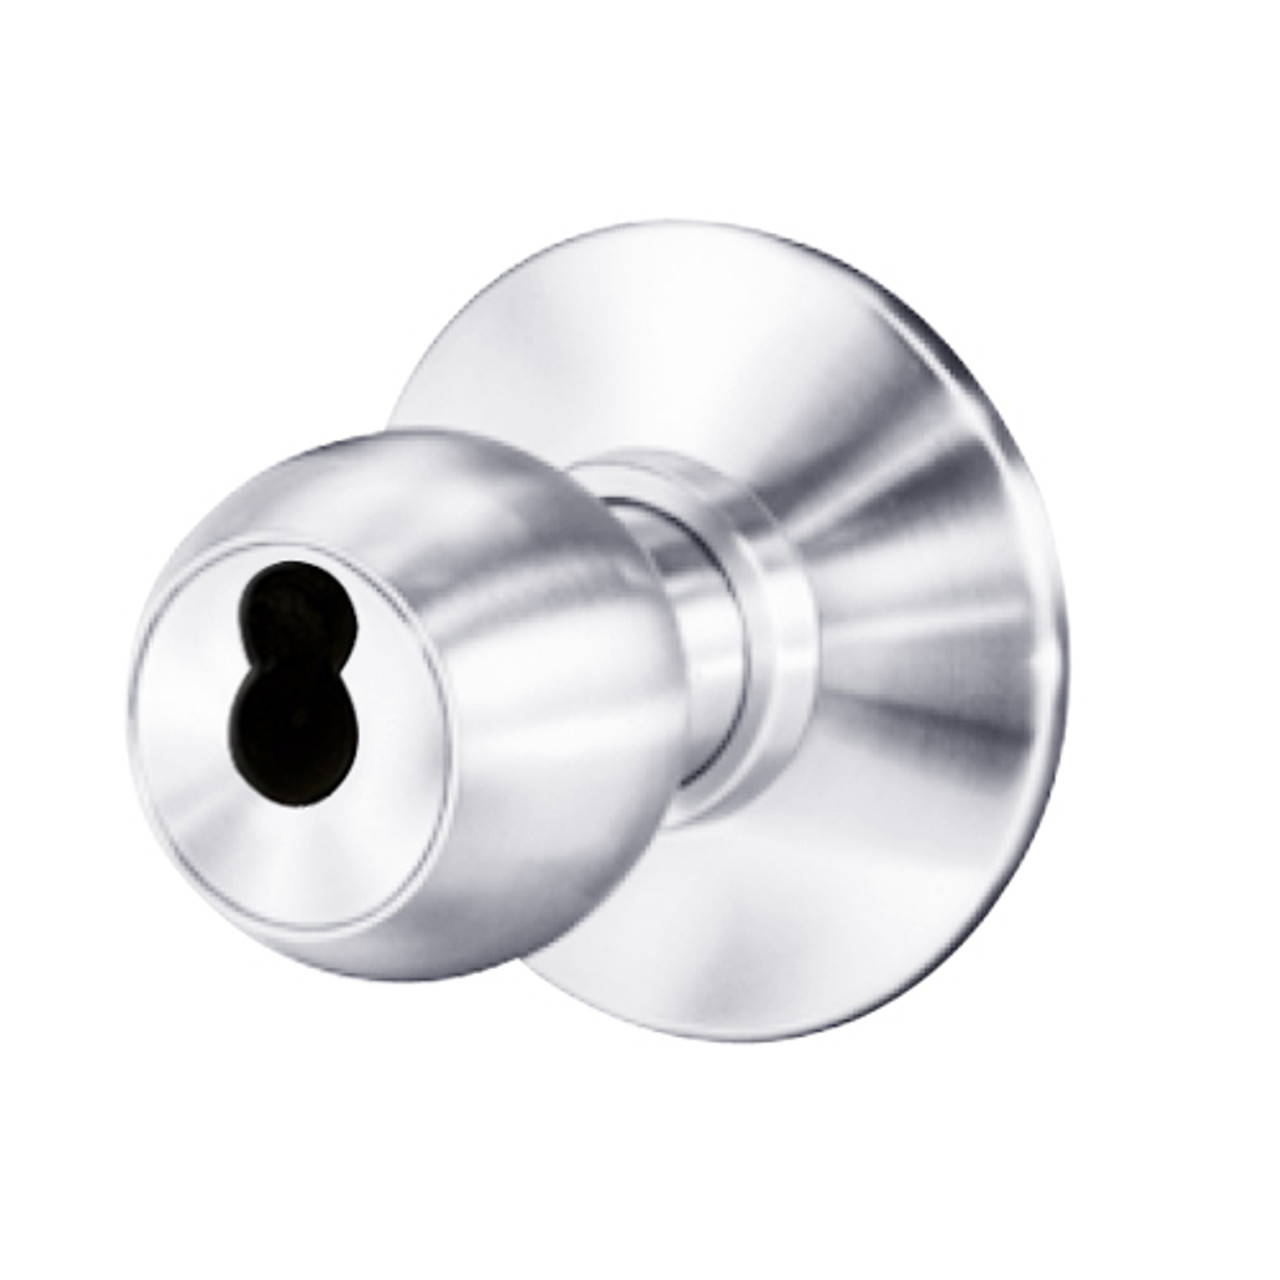 8K37G4DS3625 Best 8K Series Storeroom Heavy Duty Cylindrical Knob Locks with Round Style in Bright Chrome